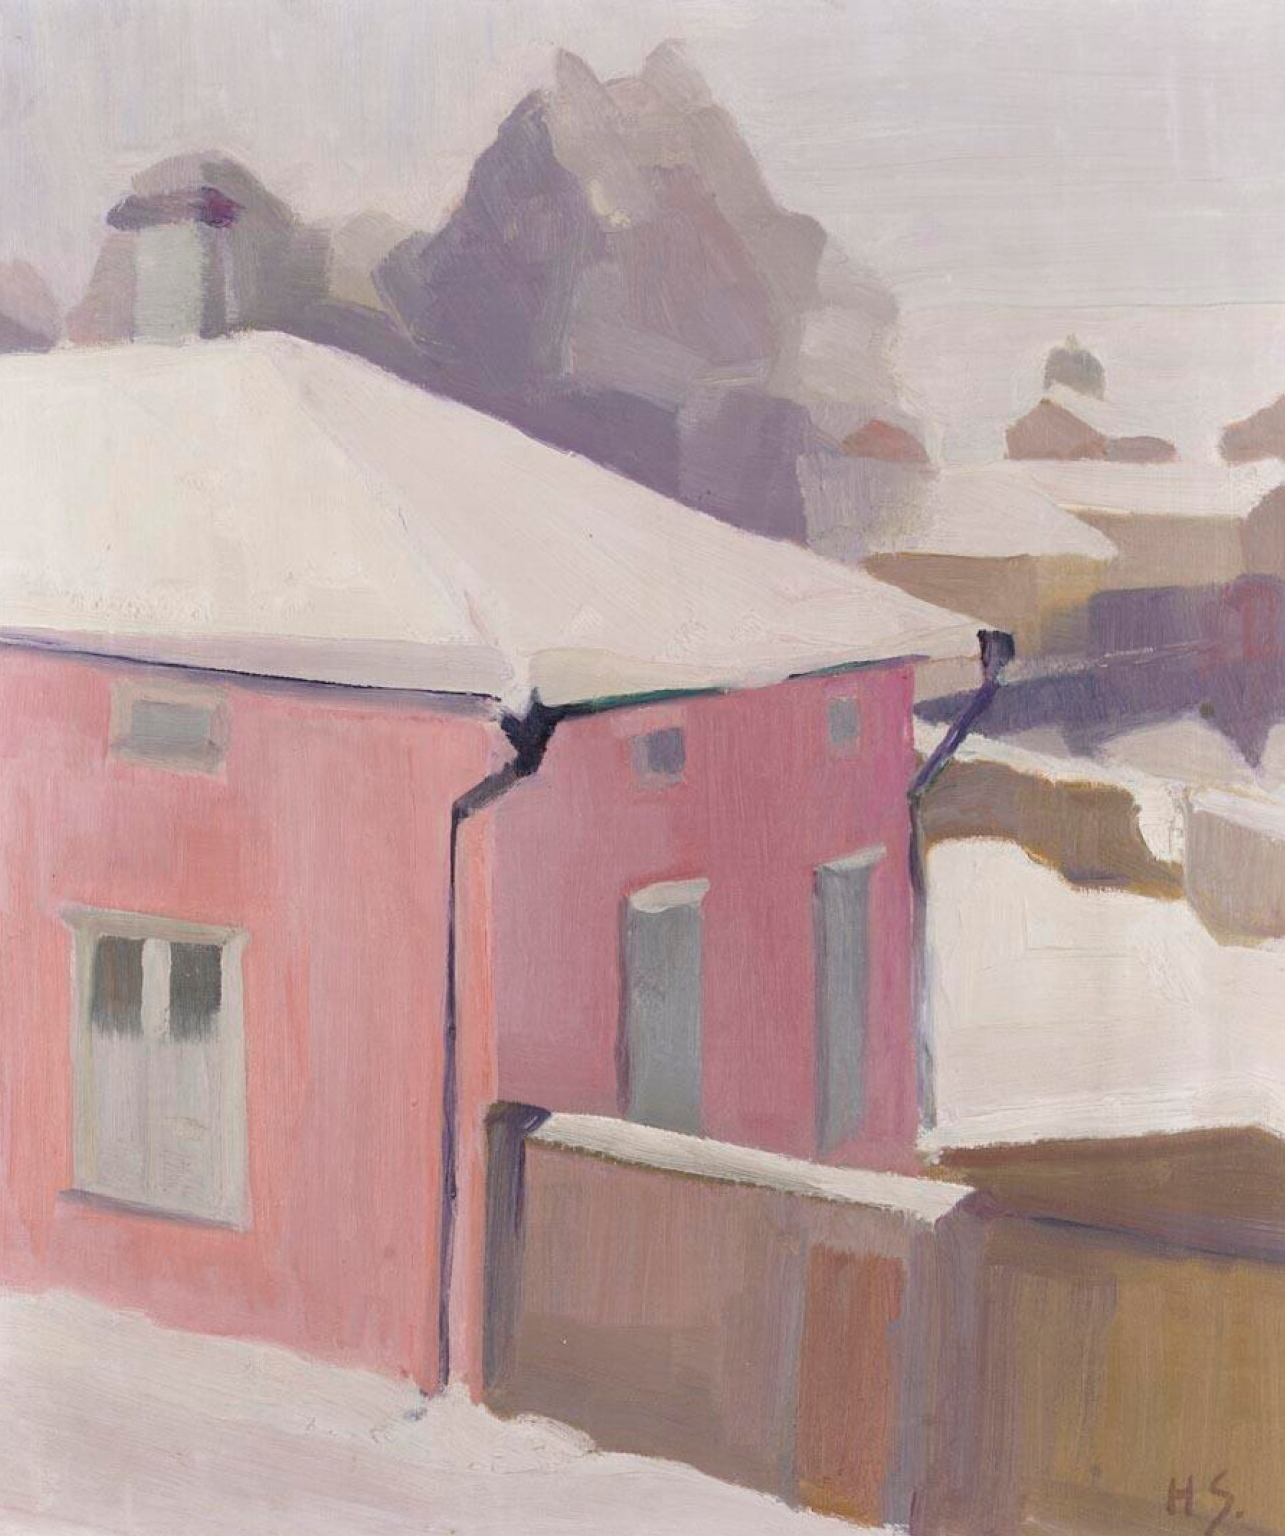 A View of a Yard in Tammisaari by Helene Schjerfbeck - 1919–1920 - 42.5 x 36.5 cm private collection